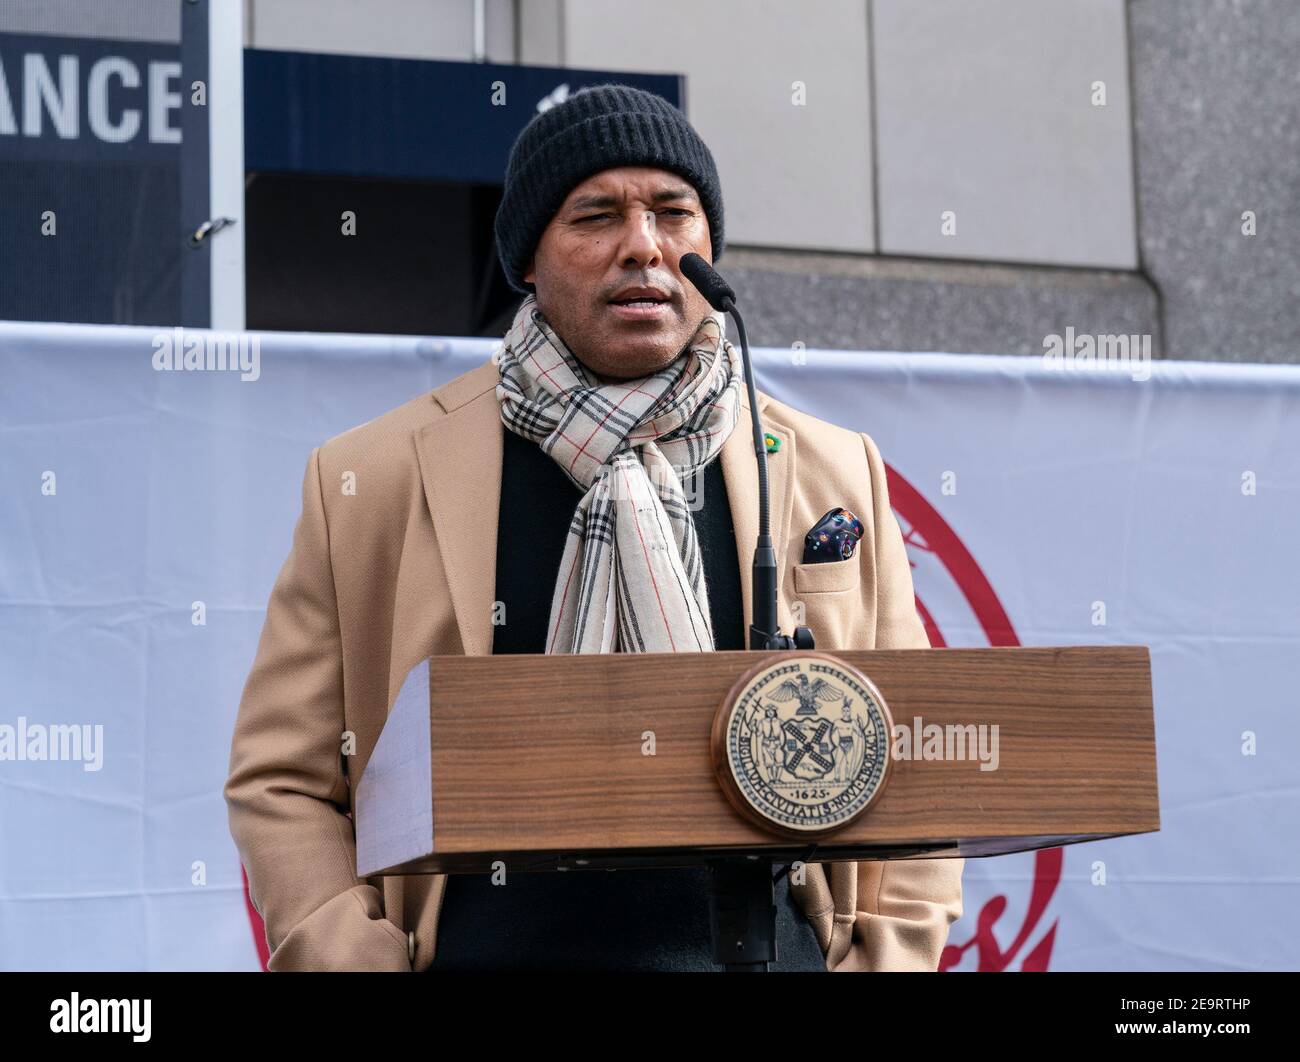 New York, United States. 05th Feb, 2021. Mariano Rivera speaks at opening  of mass vaccination site at Yankee Stadium with Yankees baseball team logo  on a backdrop in New York, on February